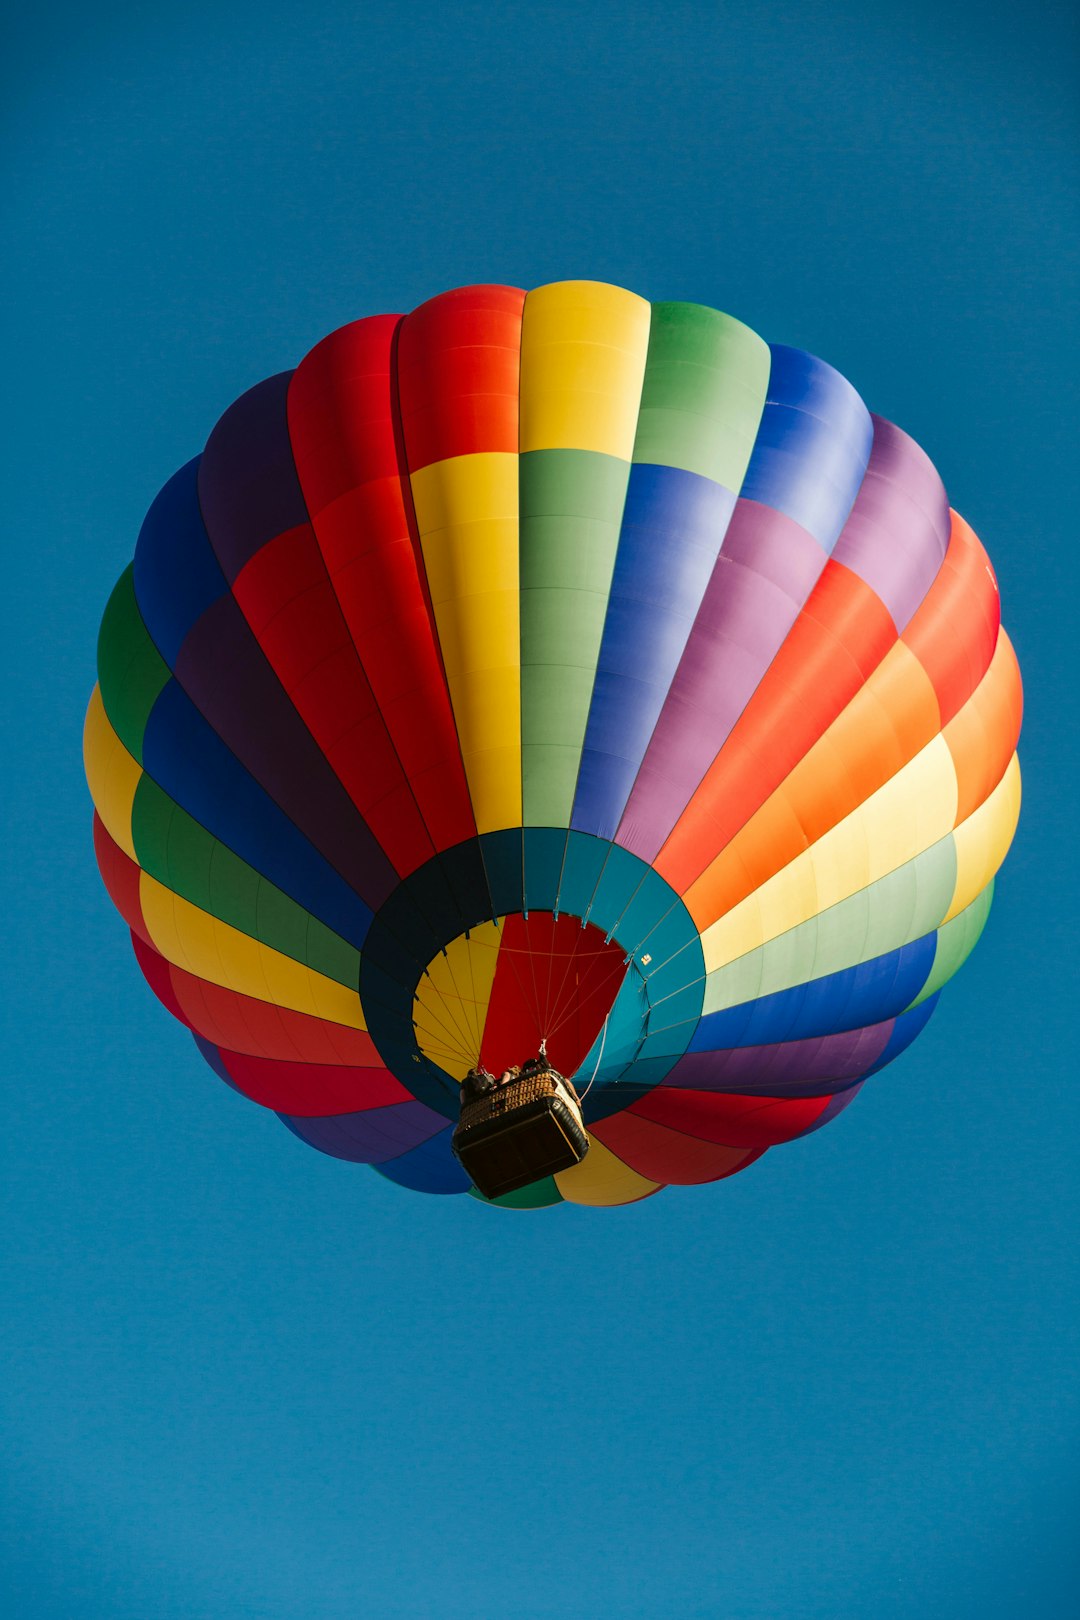 blue yellow green and red hot air balloon